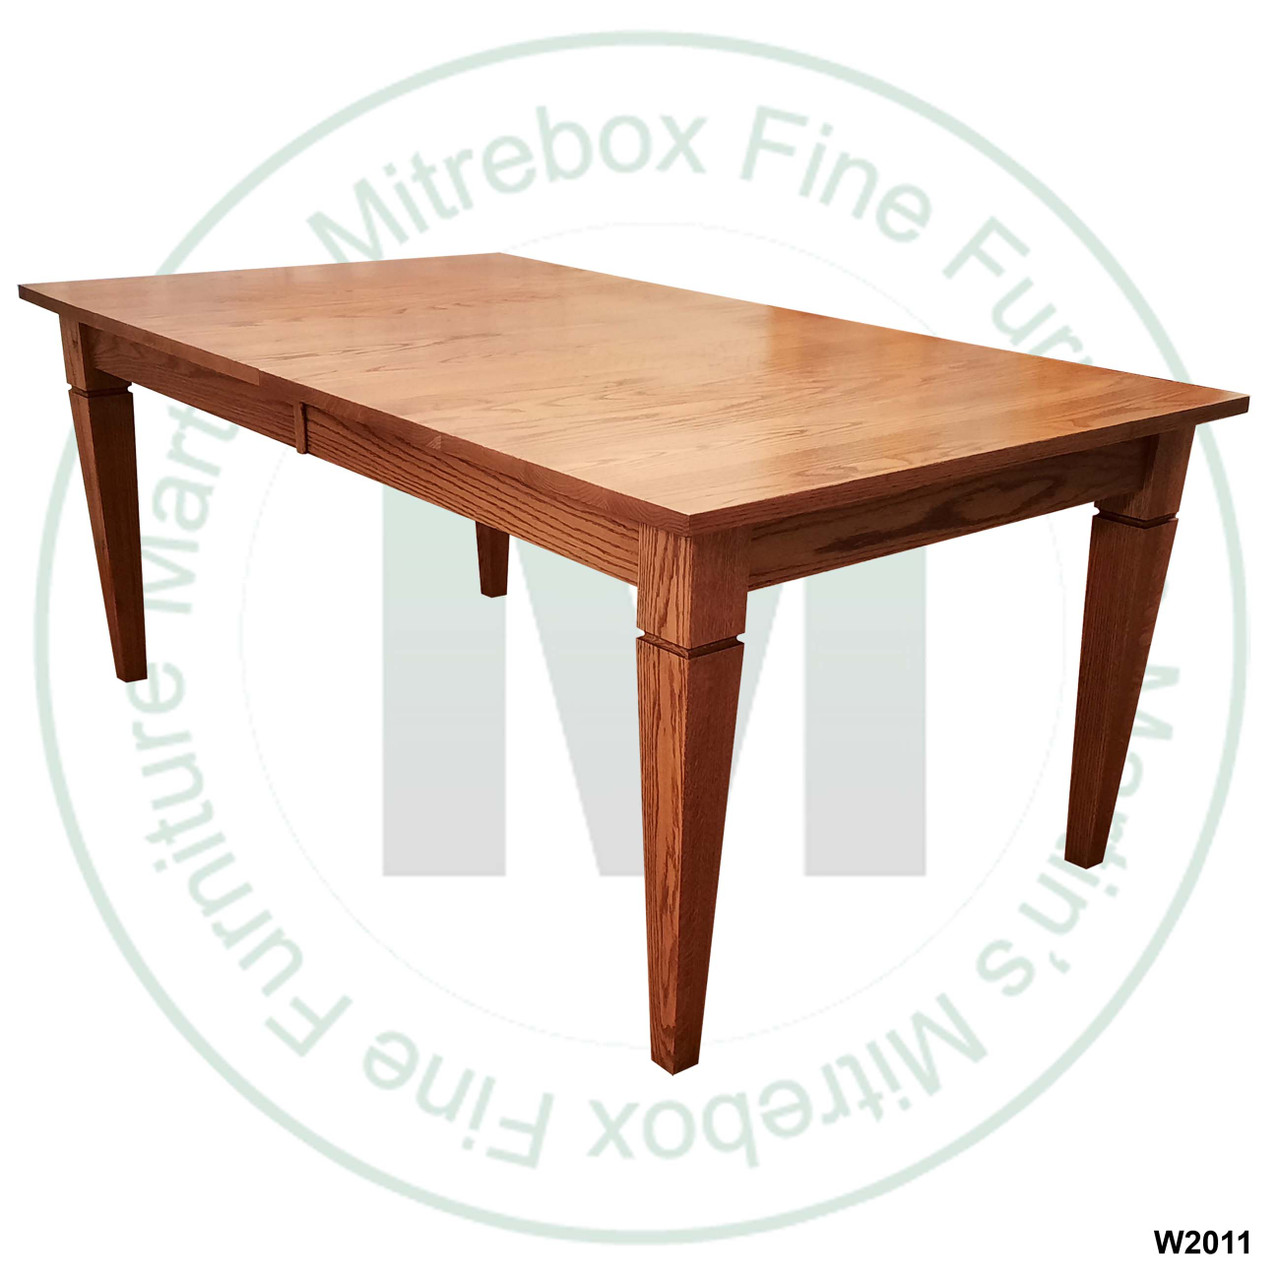 Oak Reesor Solid Top Harvest Table 36''D x 96''W x 30''H Table Has 1'' Thick Top